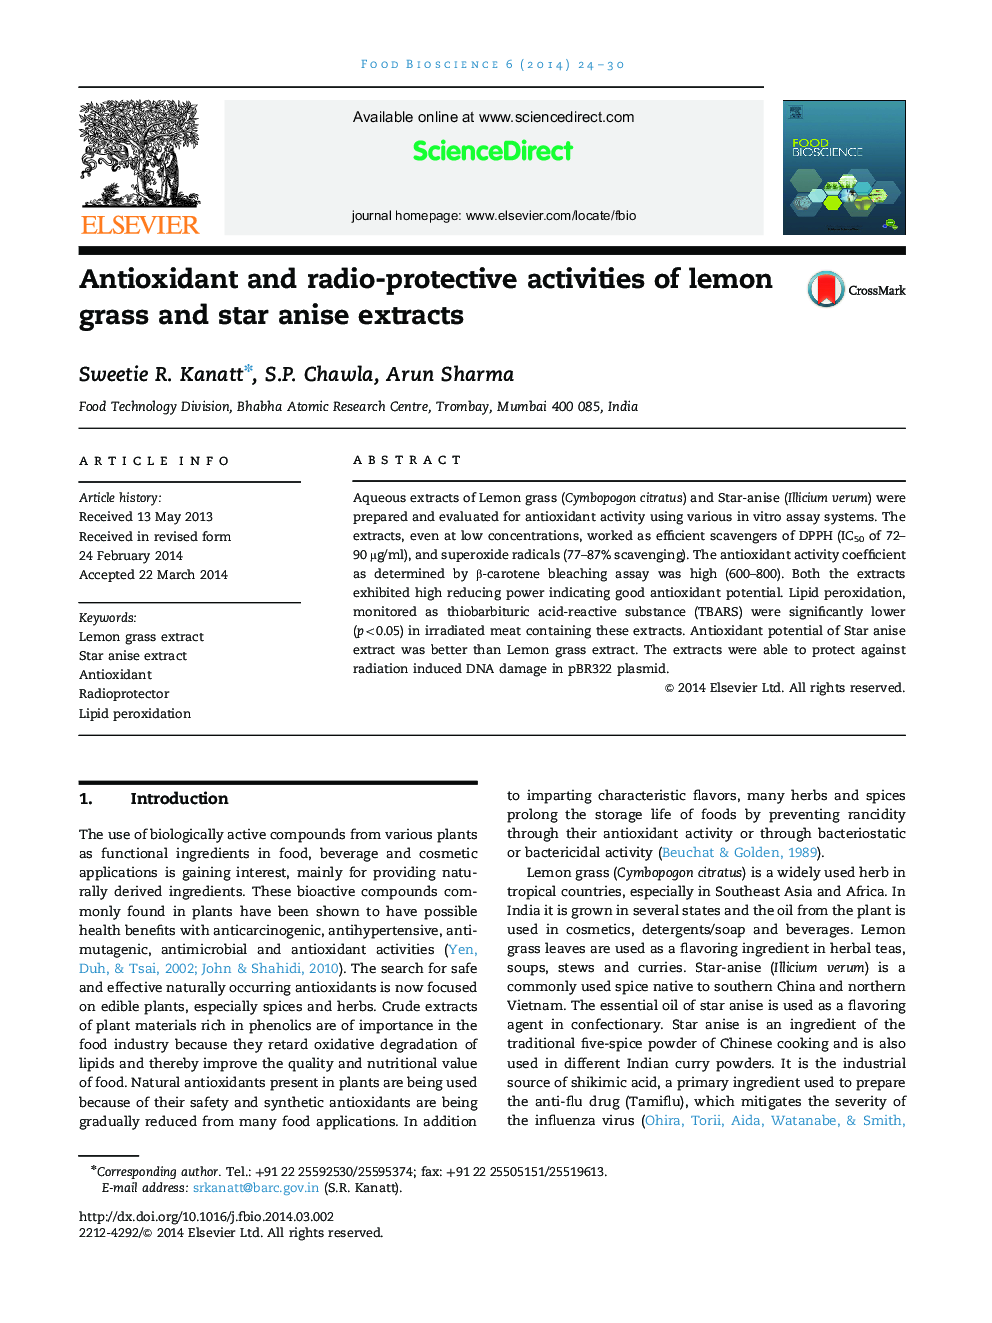 Antioxidant and radio-protective activities of lemon grass and star anise extracts